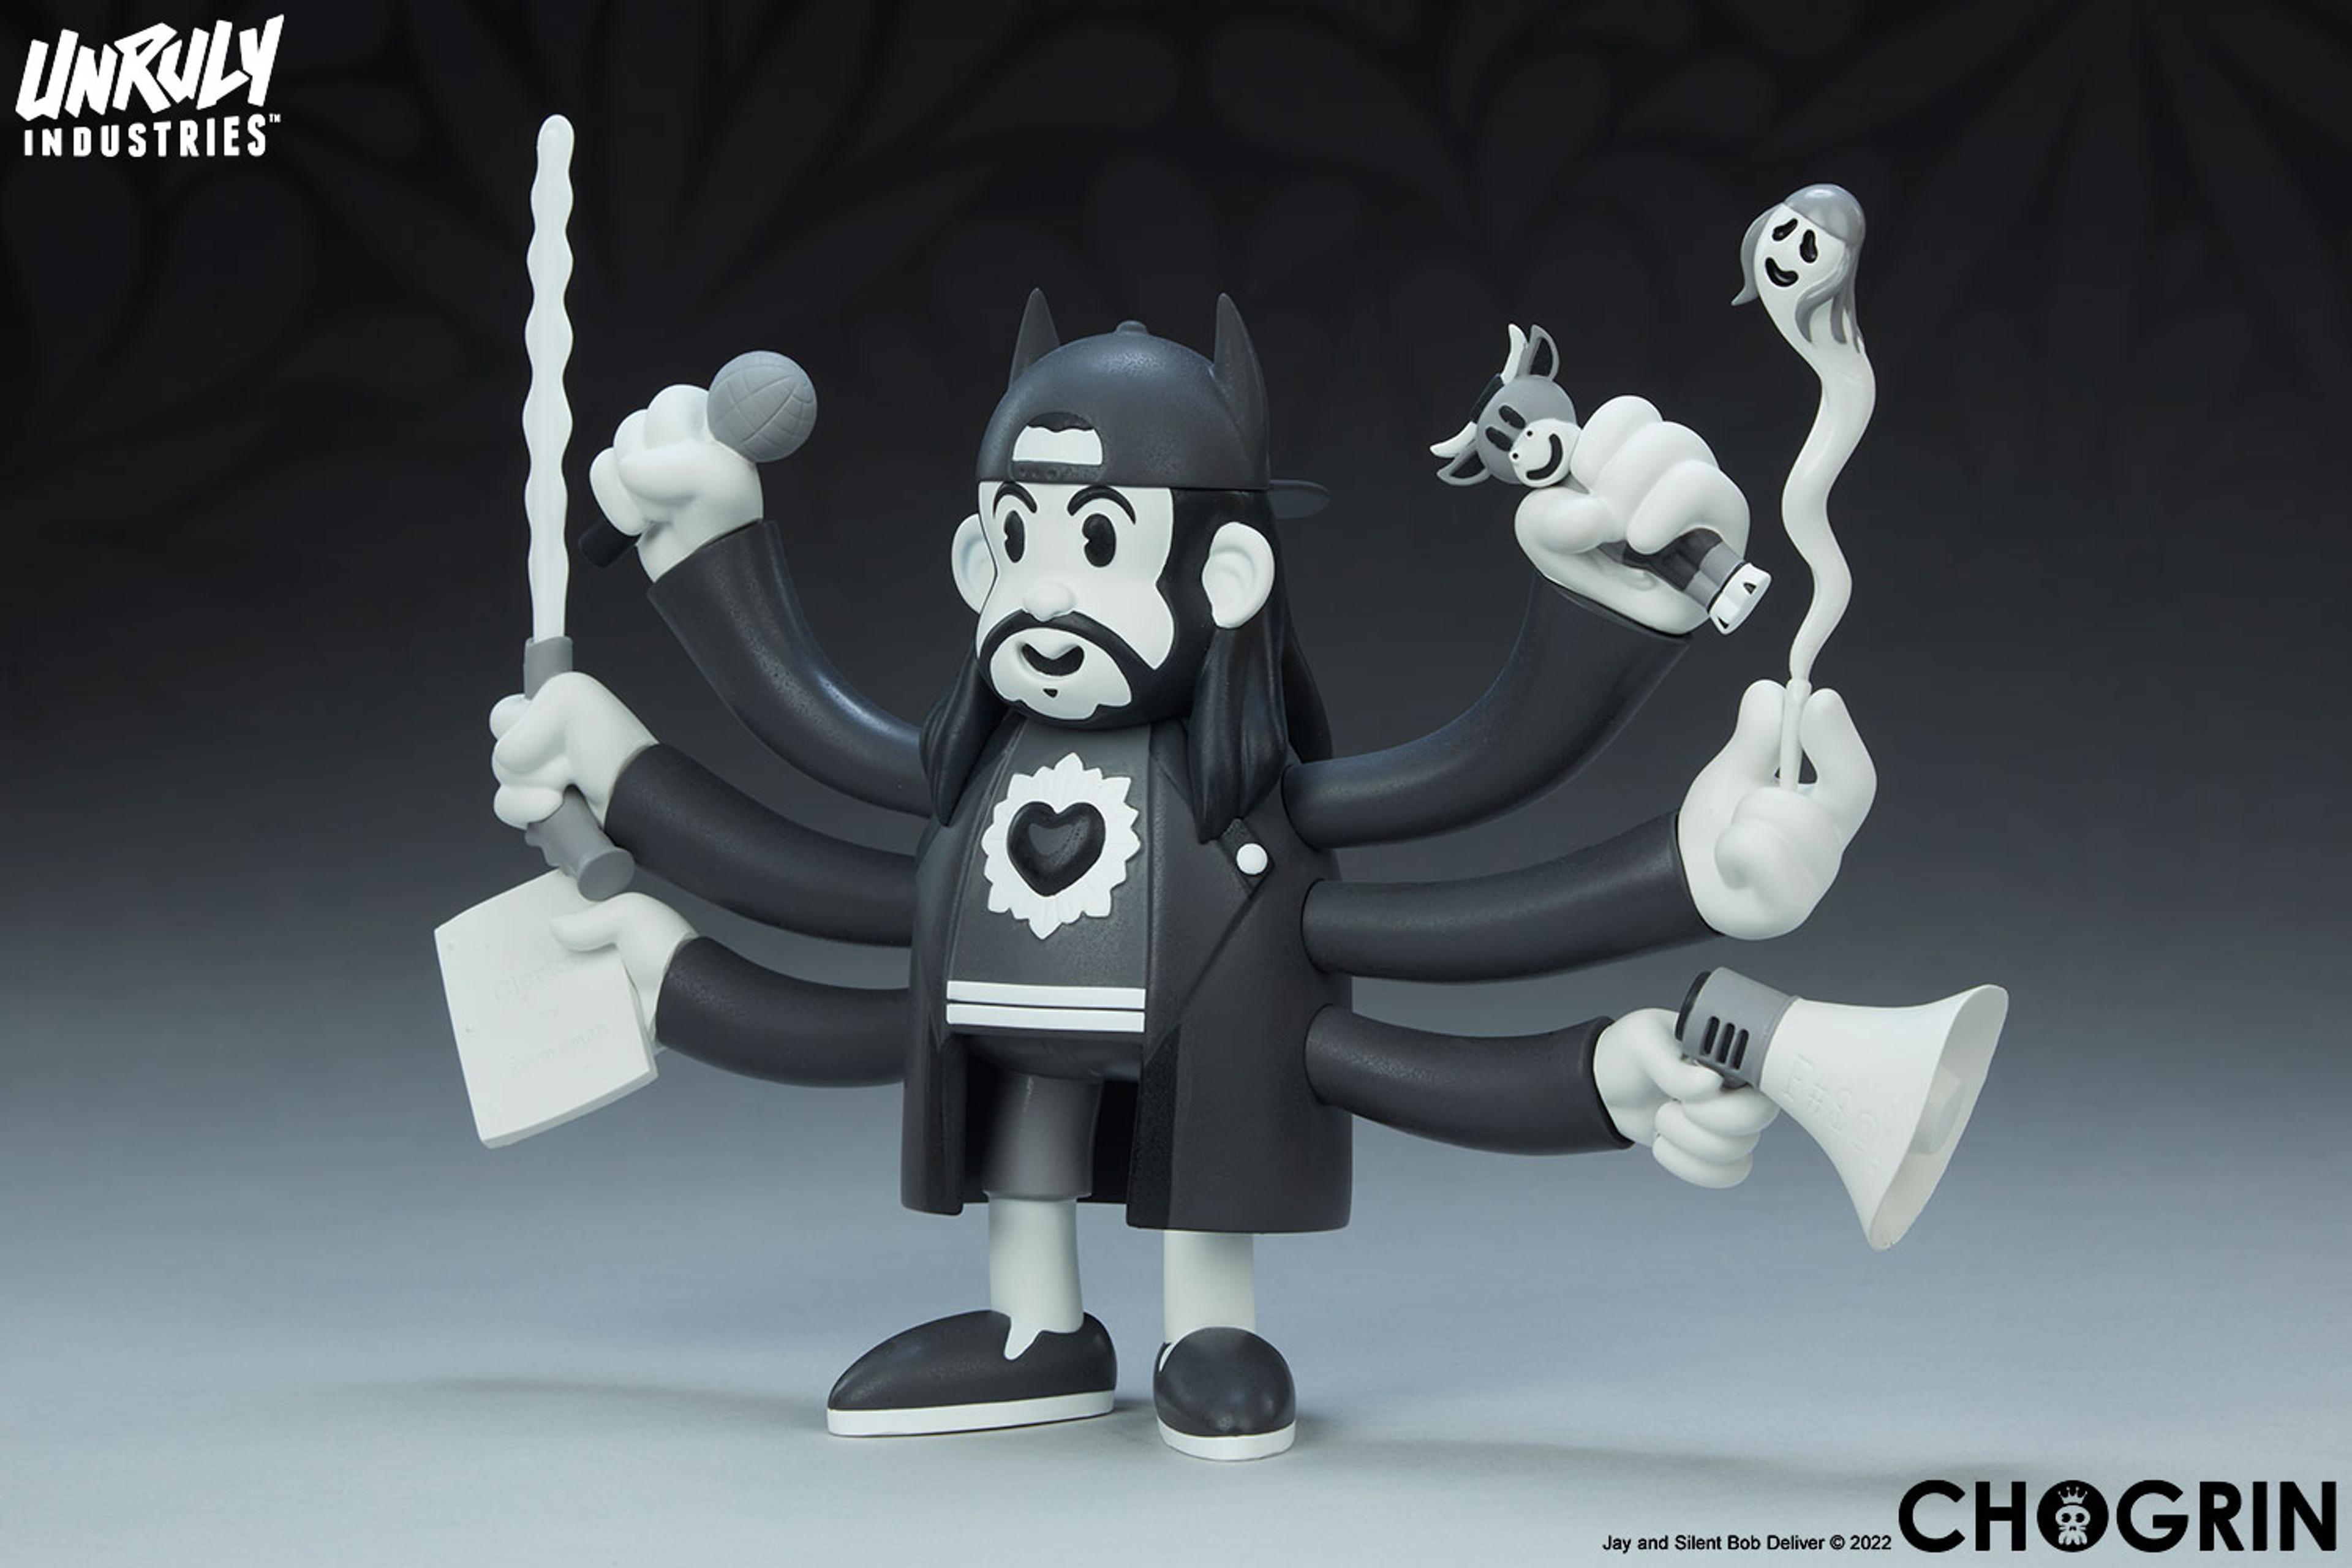 KEVIN SMITH: GURU ASKEW Designer Collectible Toy by Unruly Industries™